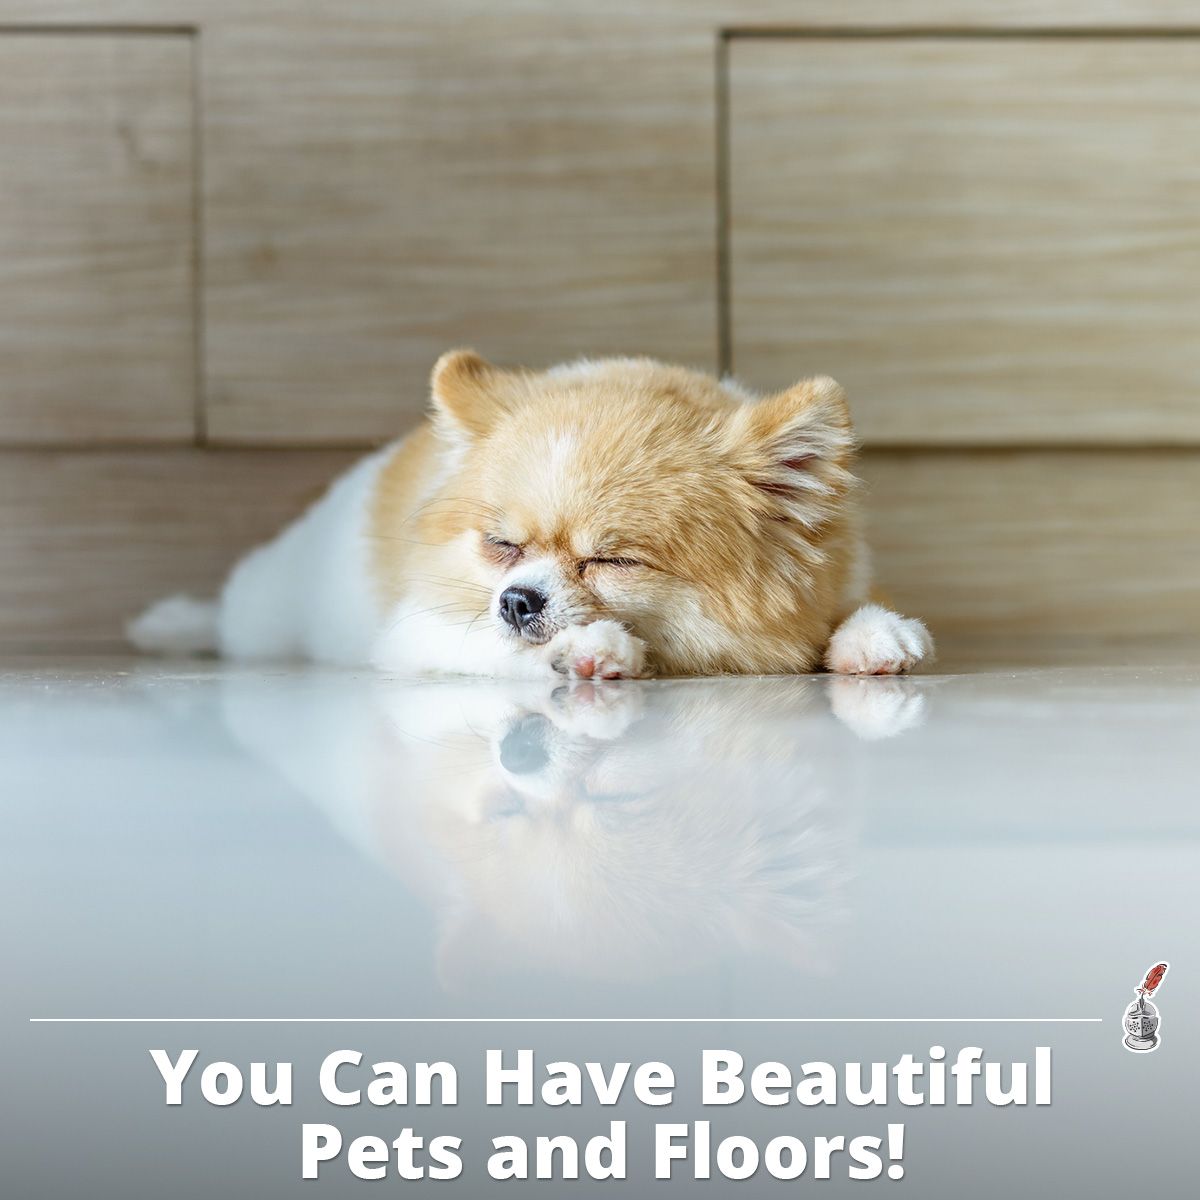 You Can Have Beautiful Pets and Floors!